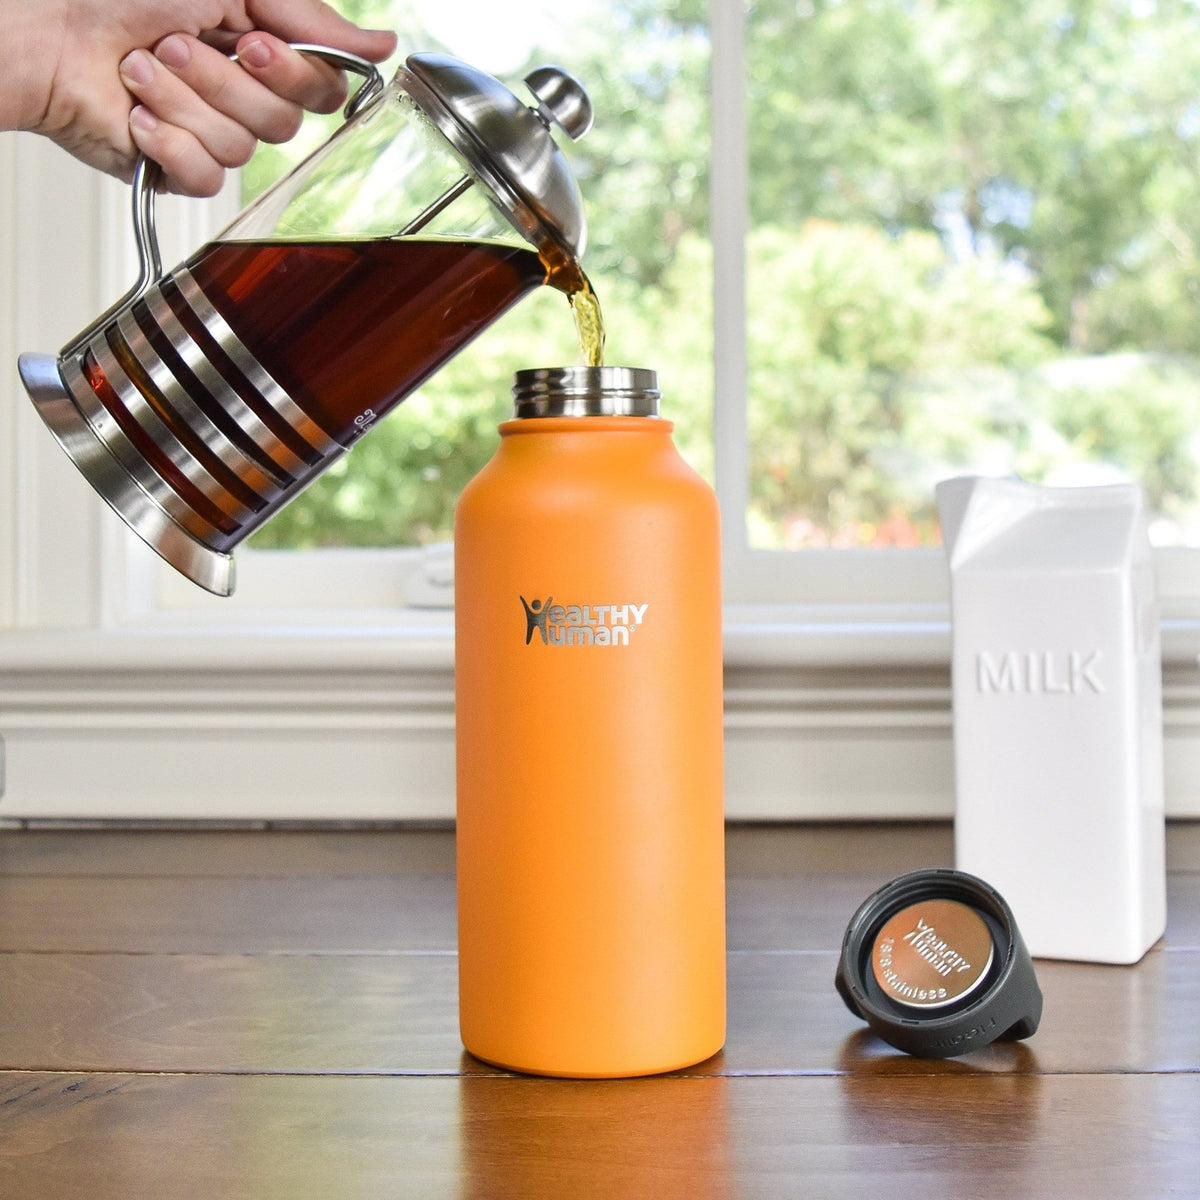 Find the Best Limited Edition: Neon Orange-Red 32oz Stainless Steel Bottle  & Lid Cirkul in the Store